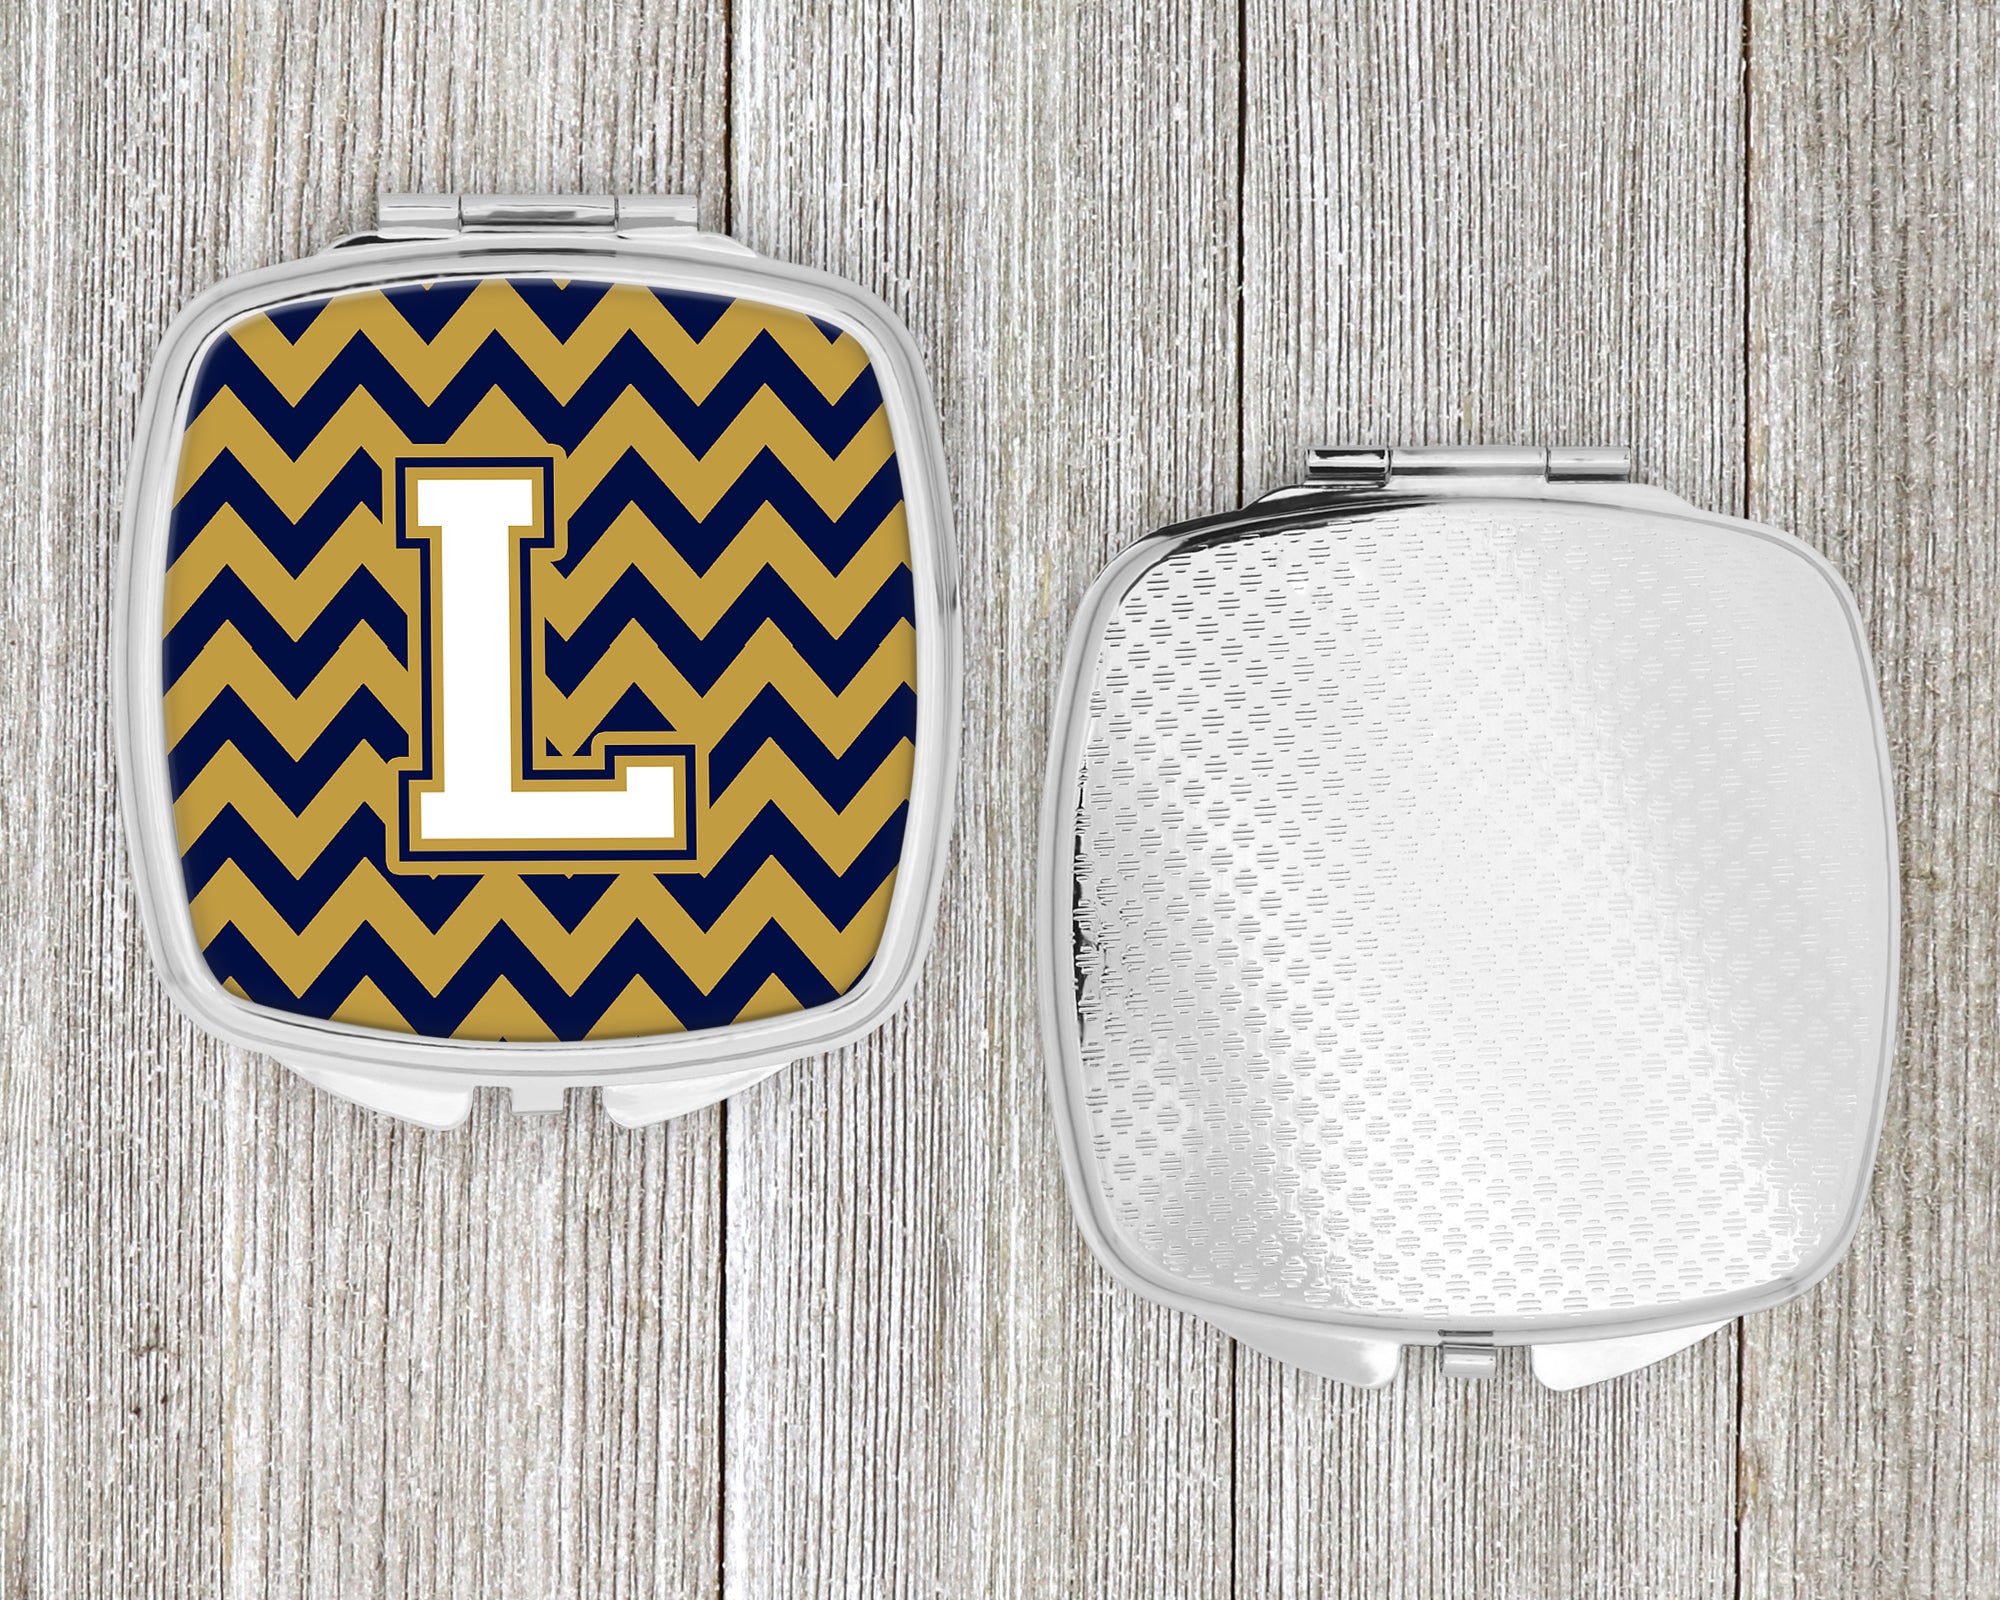 Letter L Chevron Navy Blue and Gold Compact Mirror CJ1057-LSCM  the-store.com.